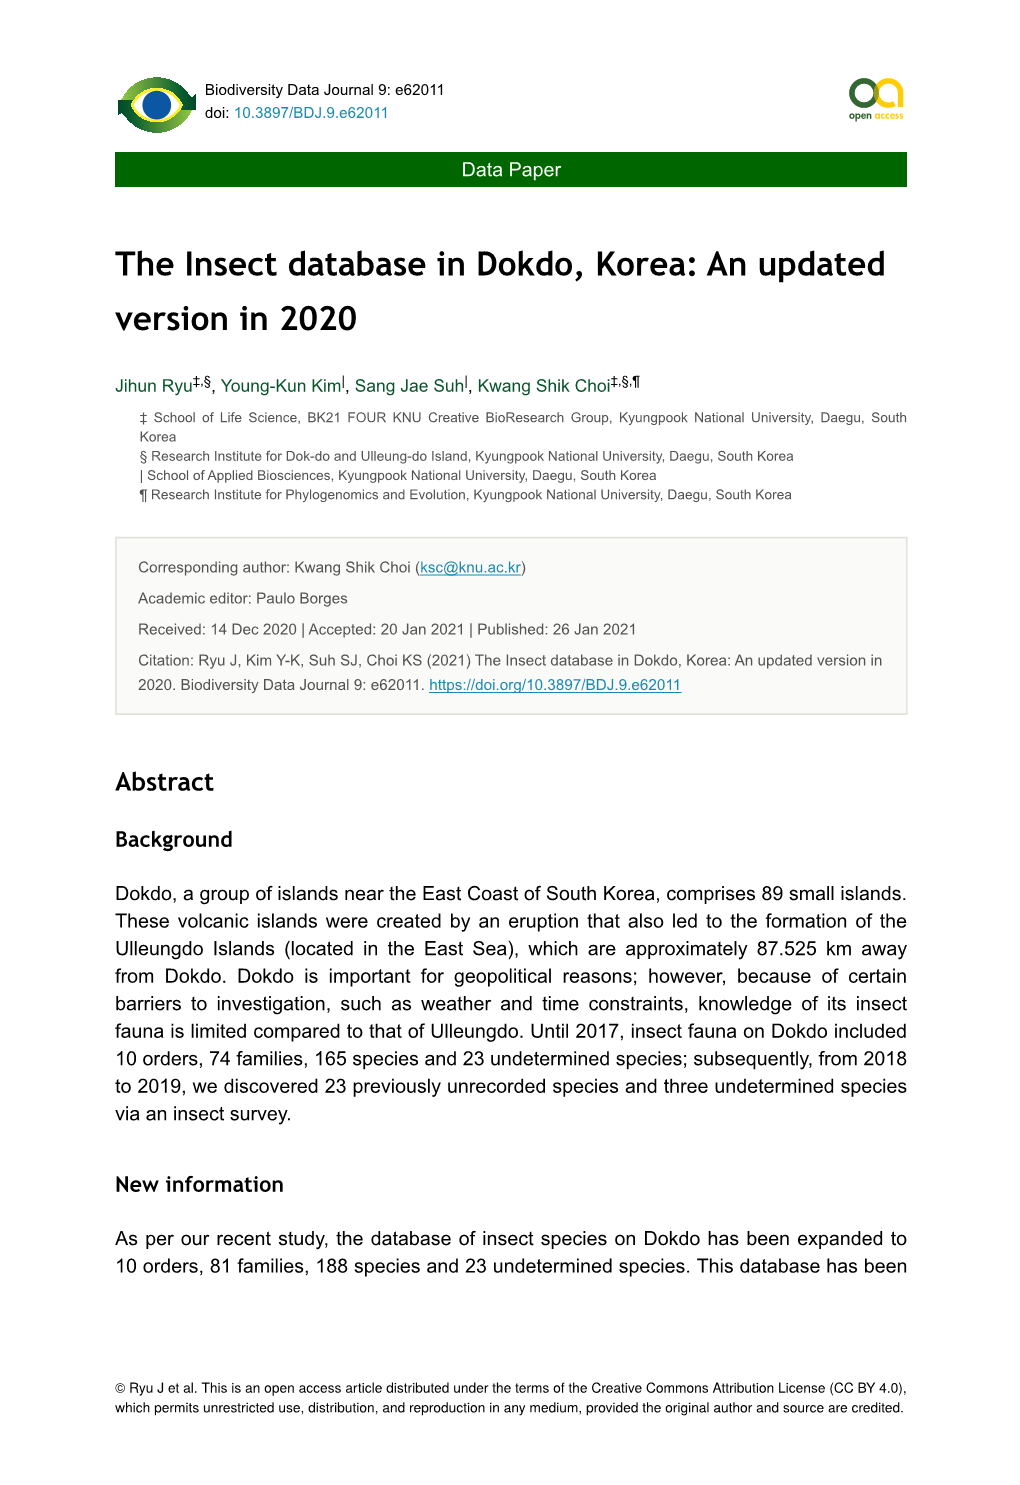 The Insect Database in Dokdo, Korea: an Updated Version in 2020